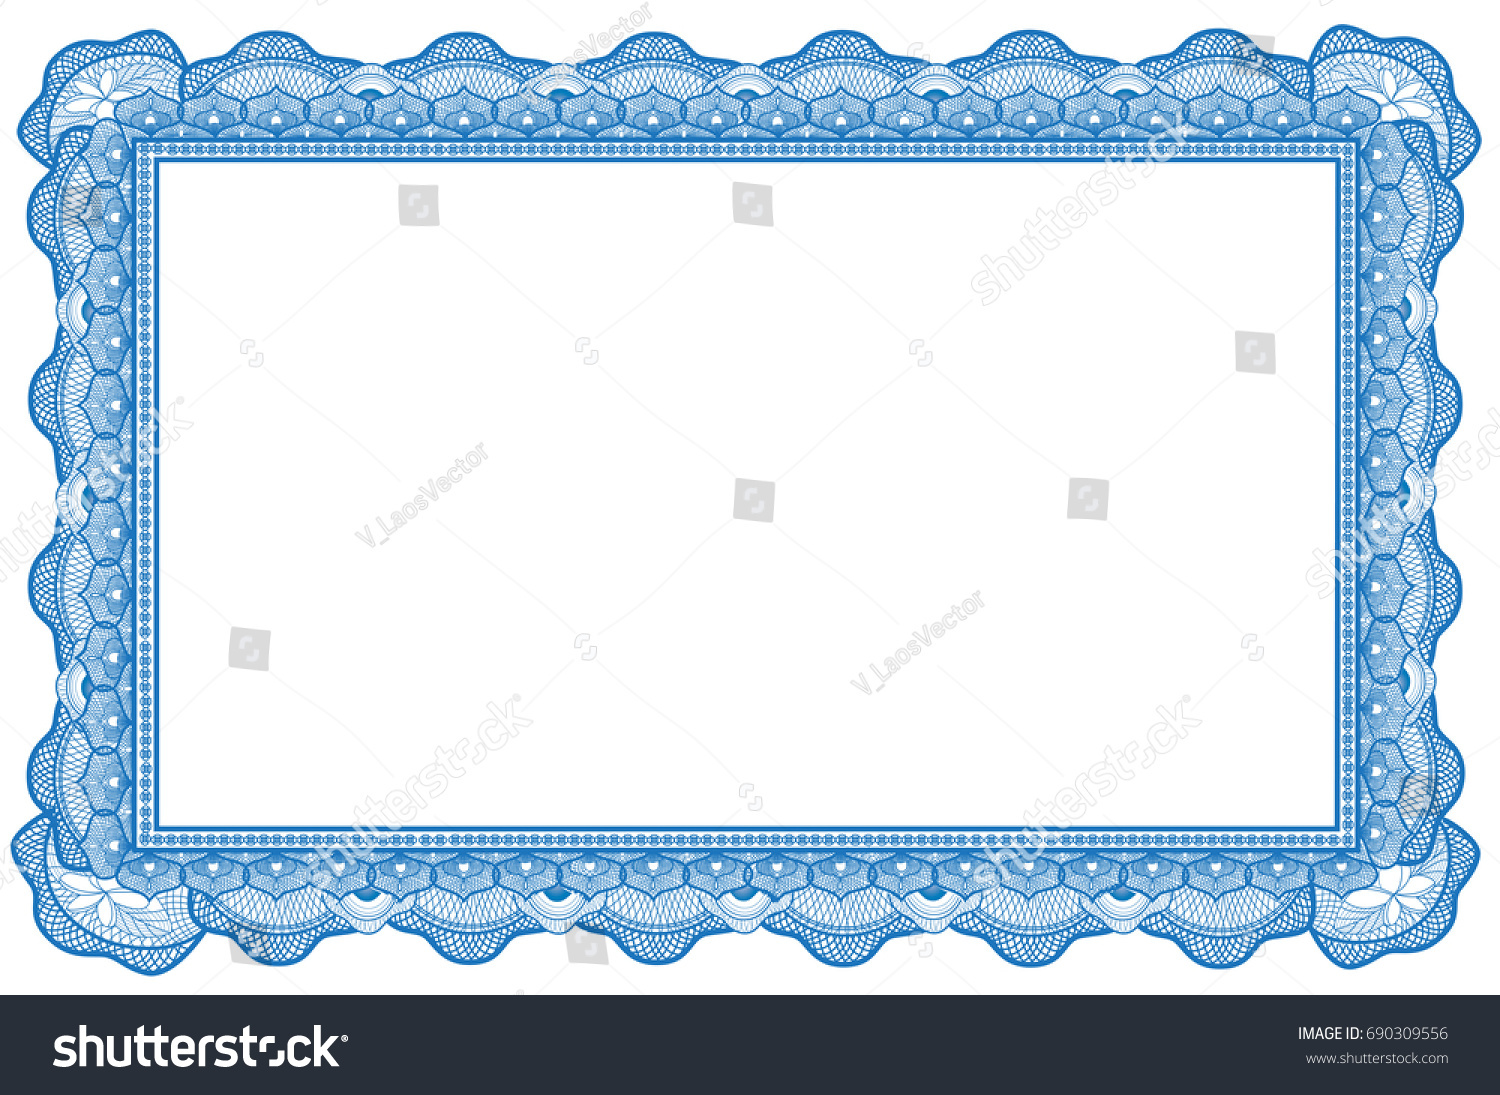 Certificate border with abstract kine #690309556